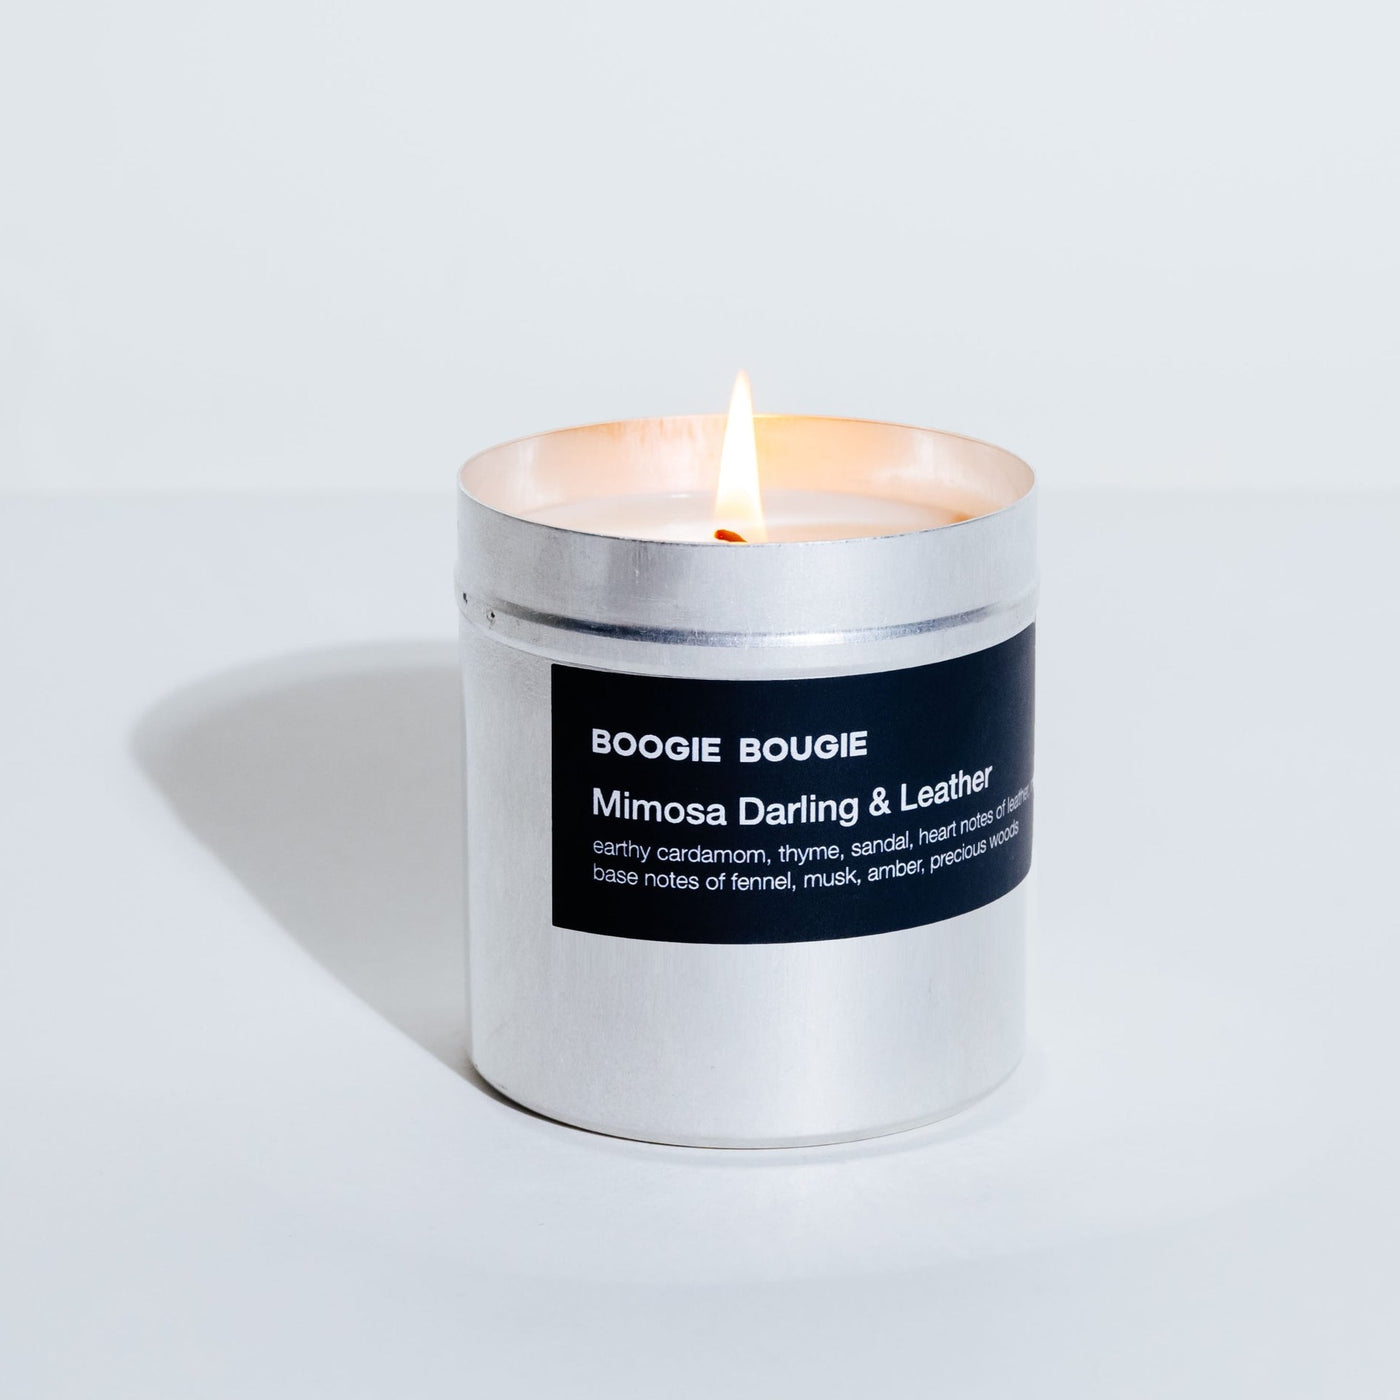 Scented candle Mimosa Darling & Leather